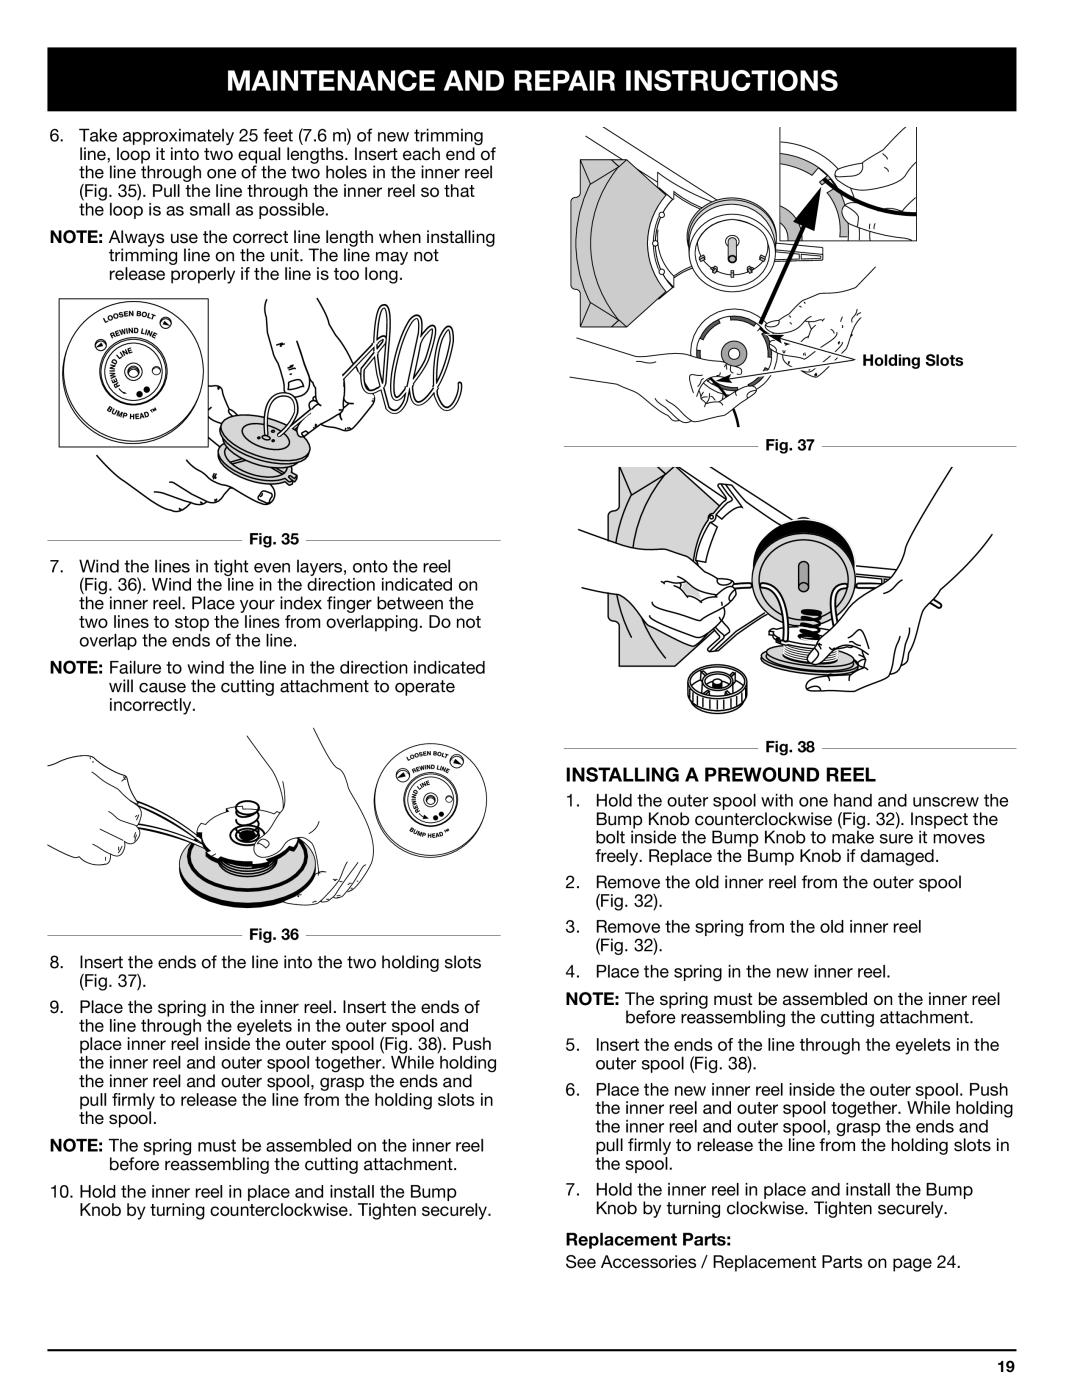 Ryobi 890r manual Installing A Prewound Reel, Maintenance And Repair Instructions, Replacement Parts 